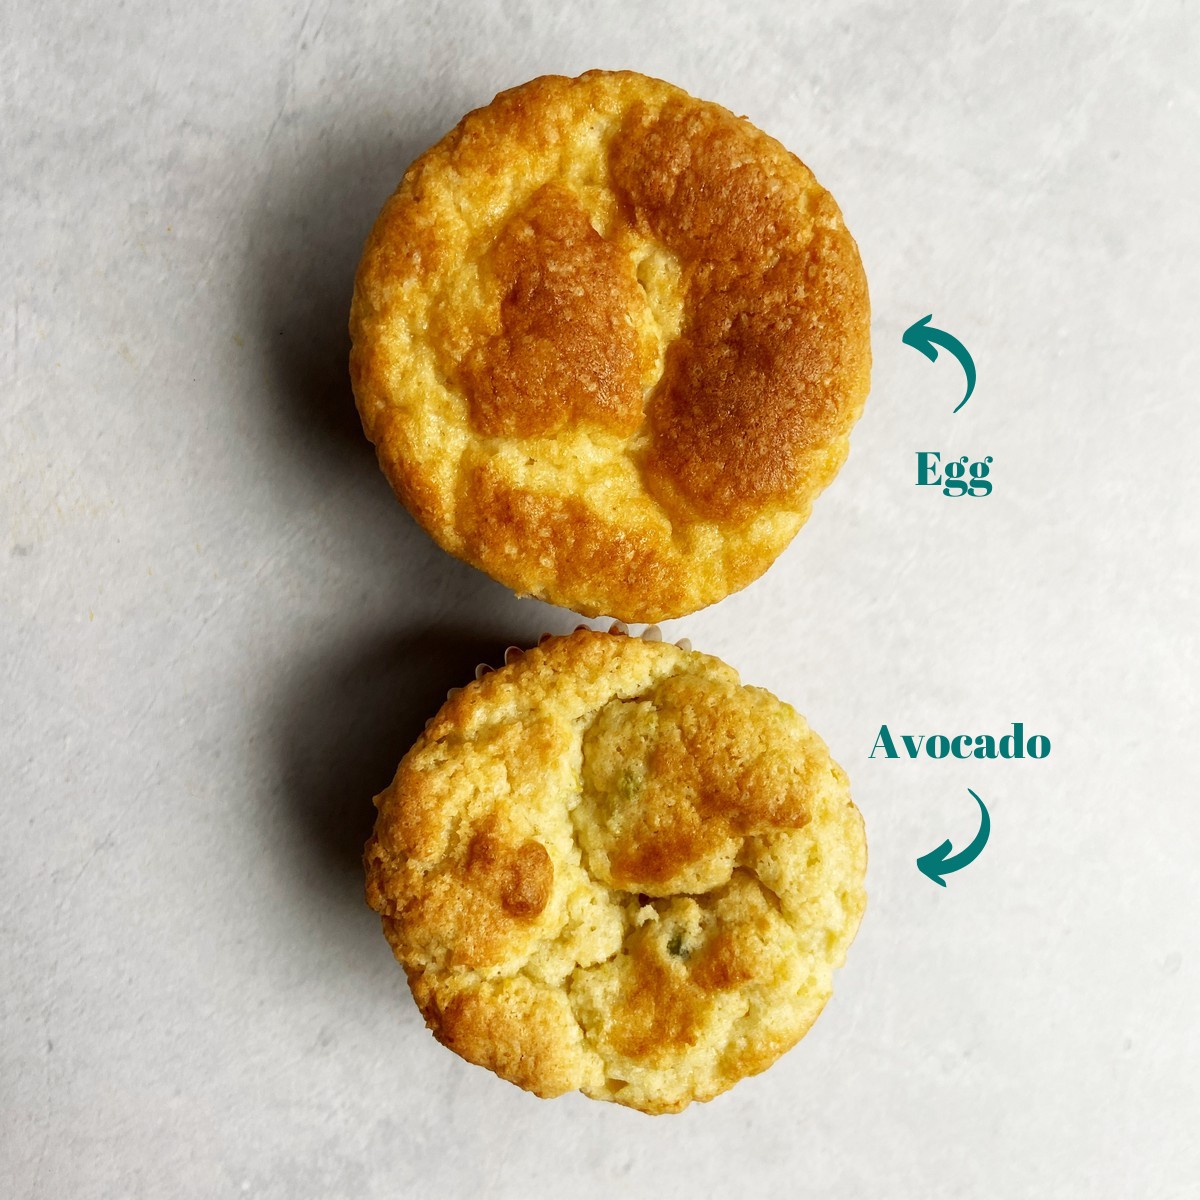 A muffin made with egg and another made with avocado.